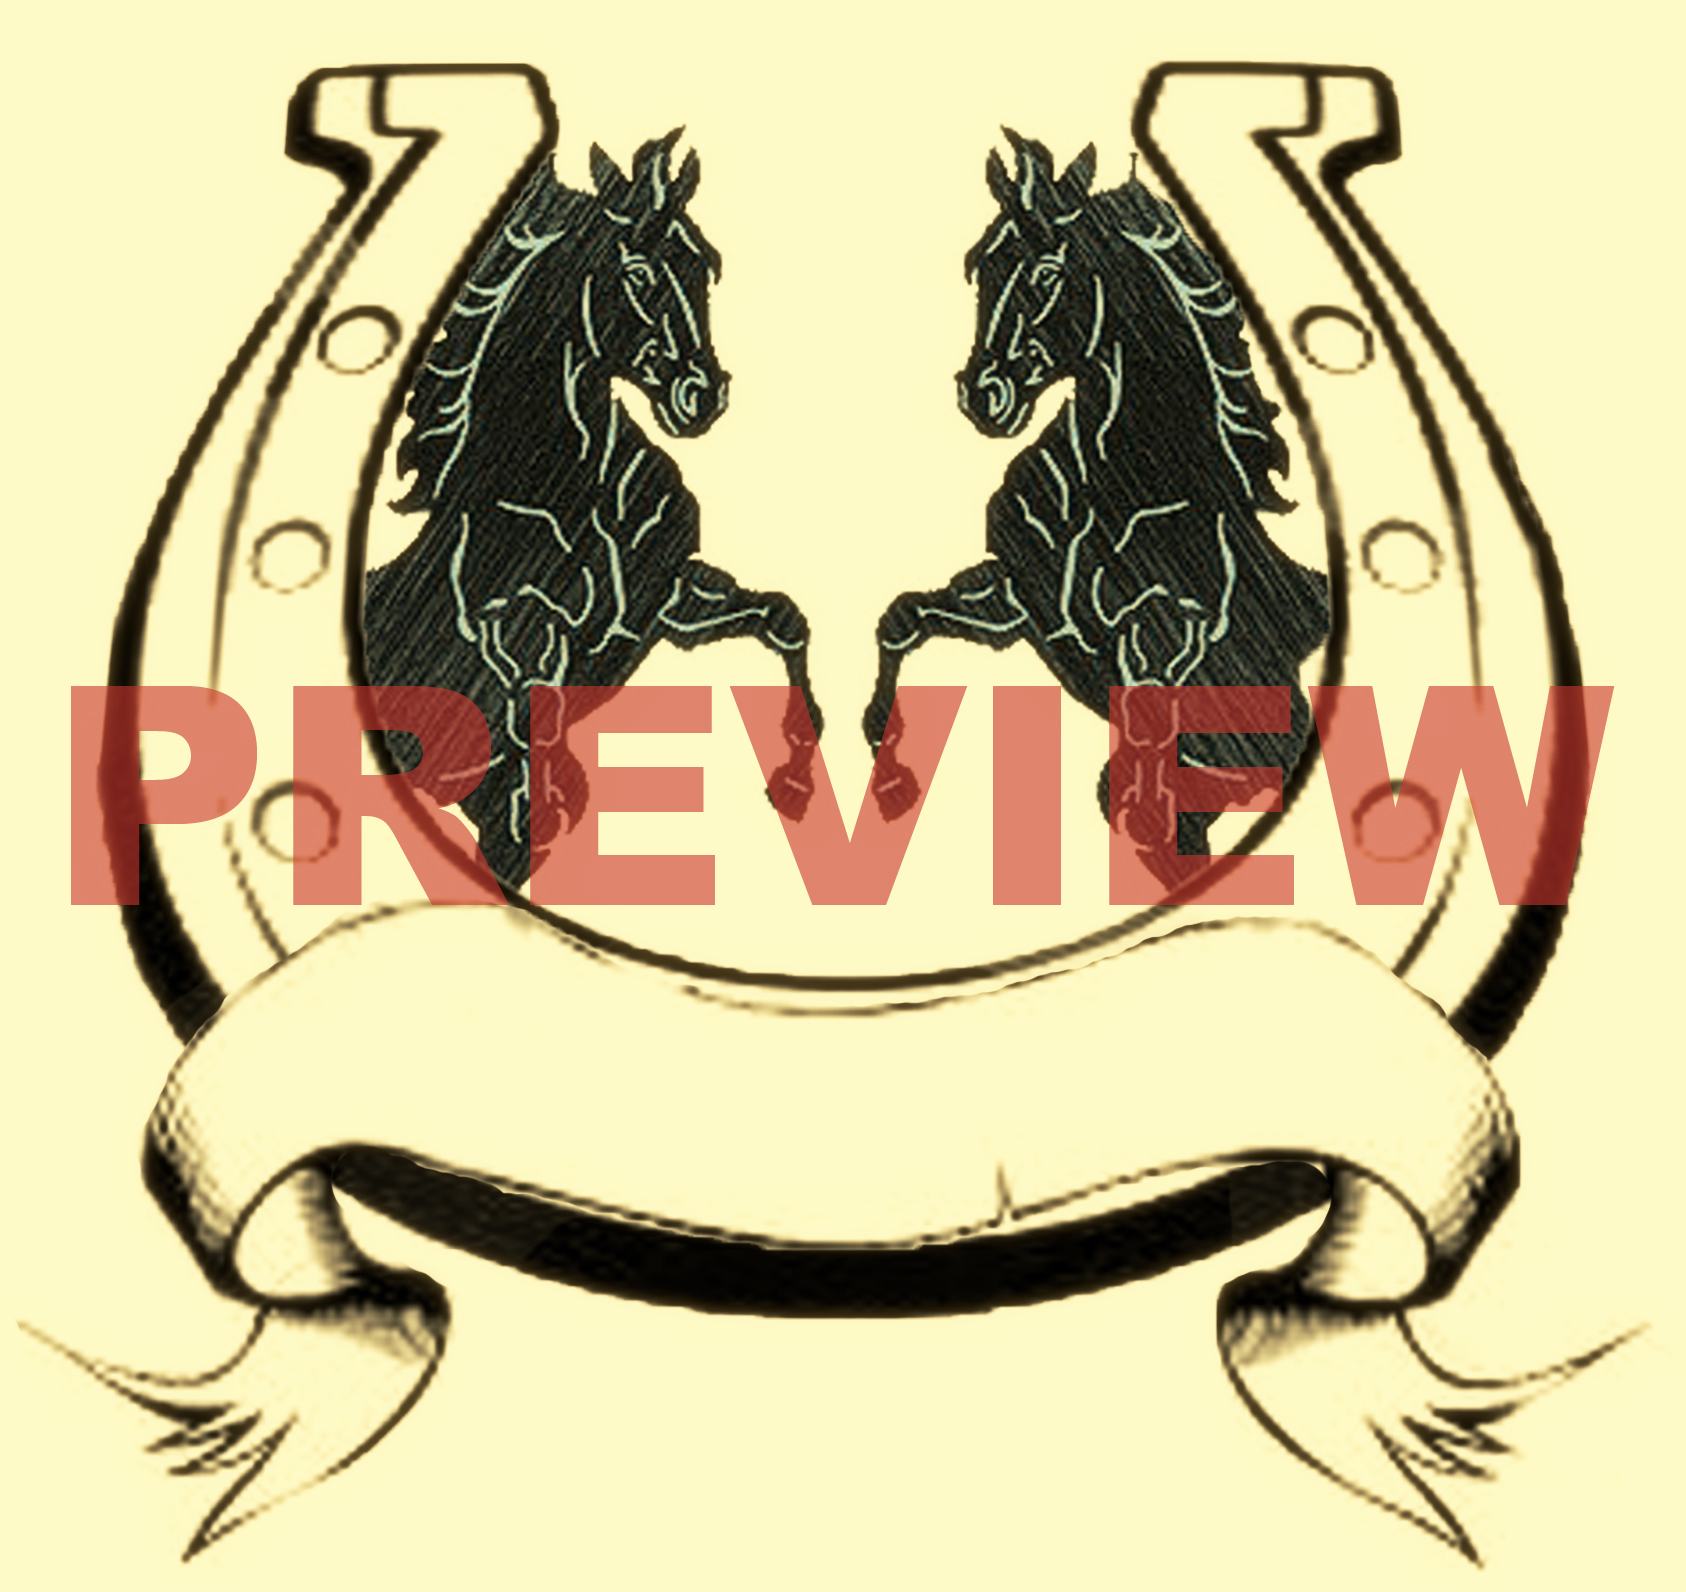 Horse 2 preview-compressed.jpg